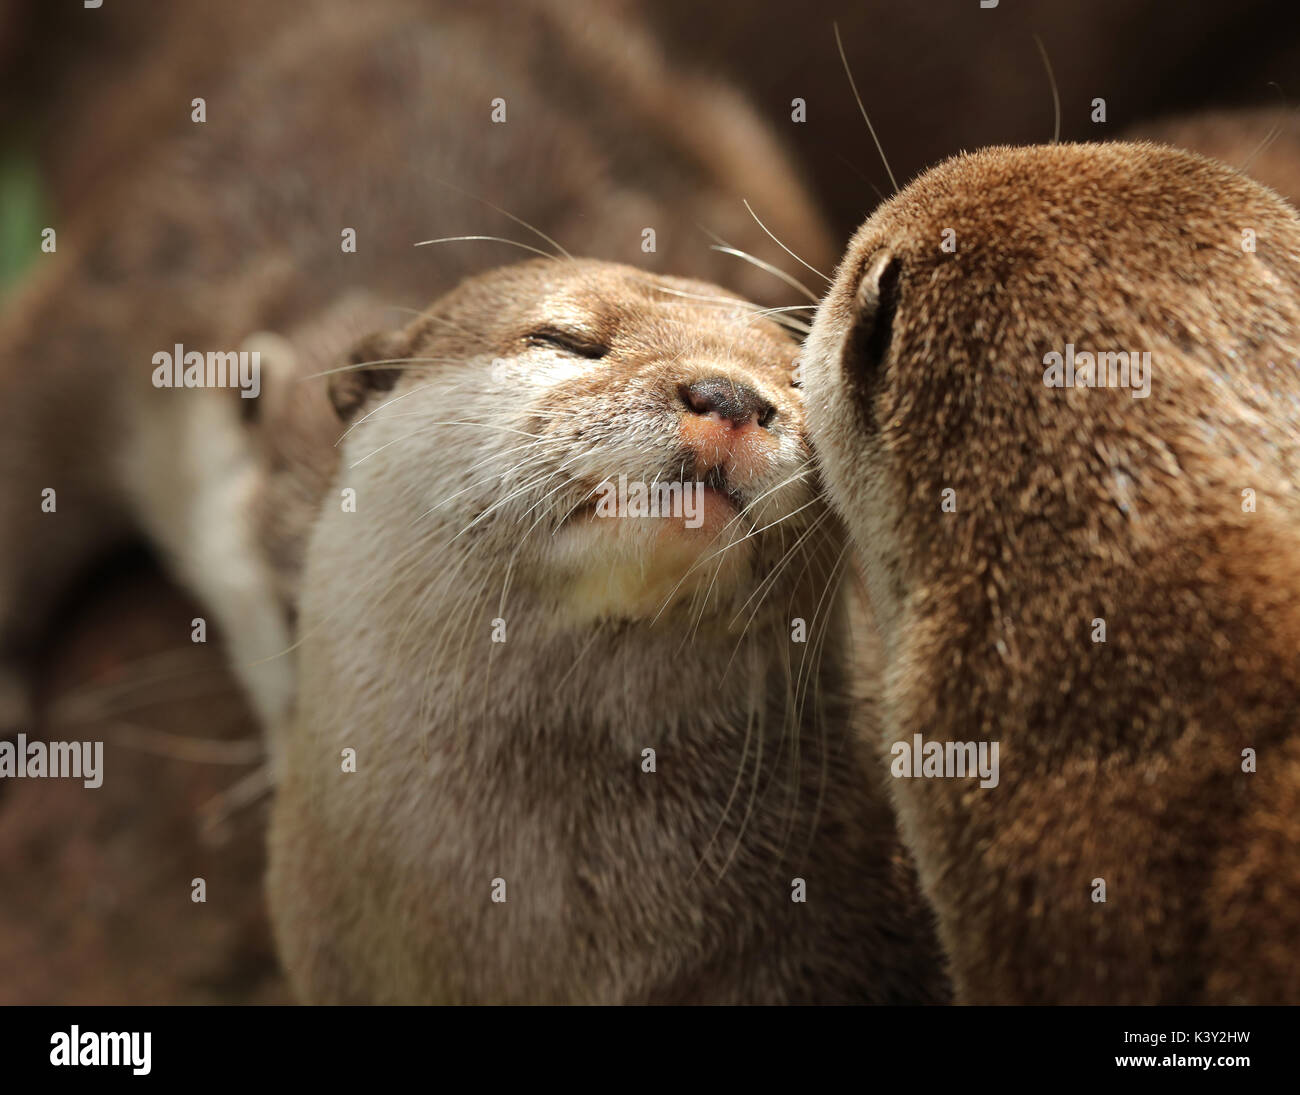 A pair of cuddling Oriental Short Clawed Otters Stock Photo